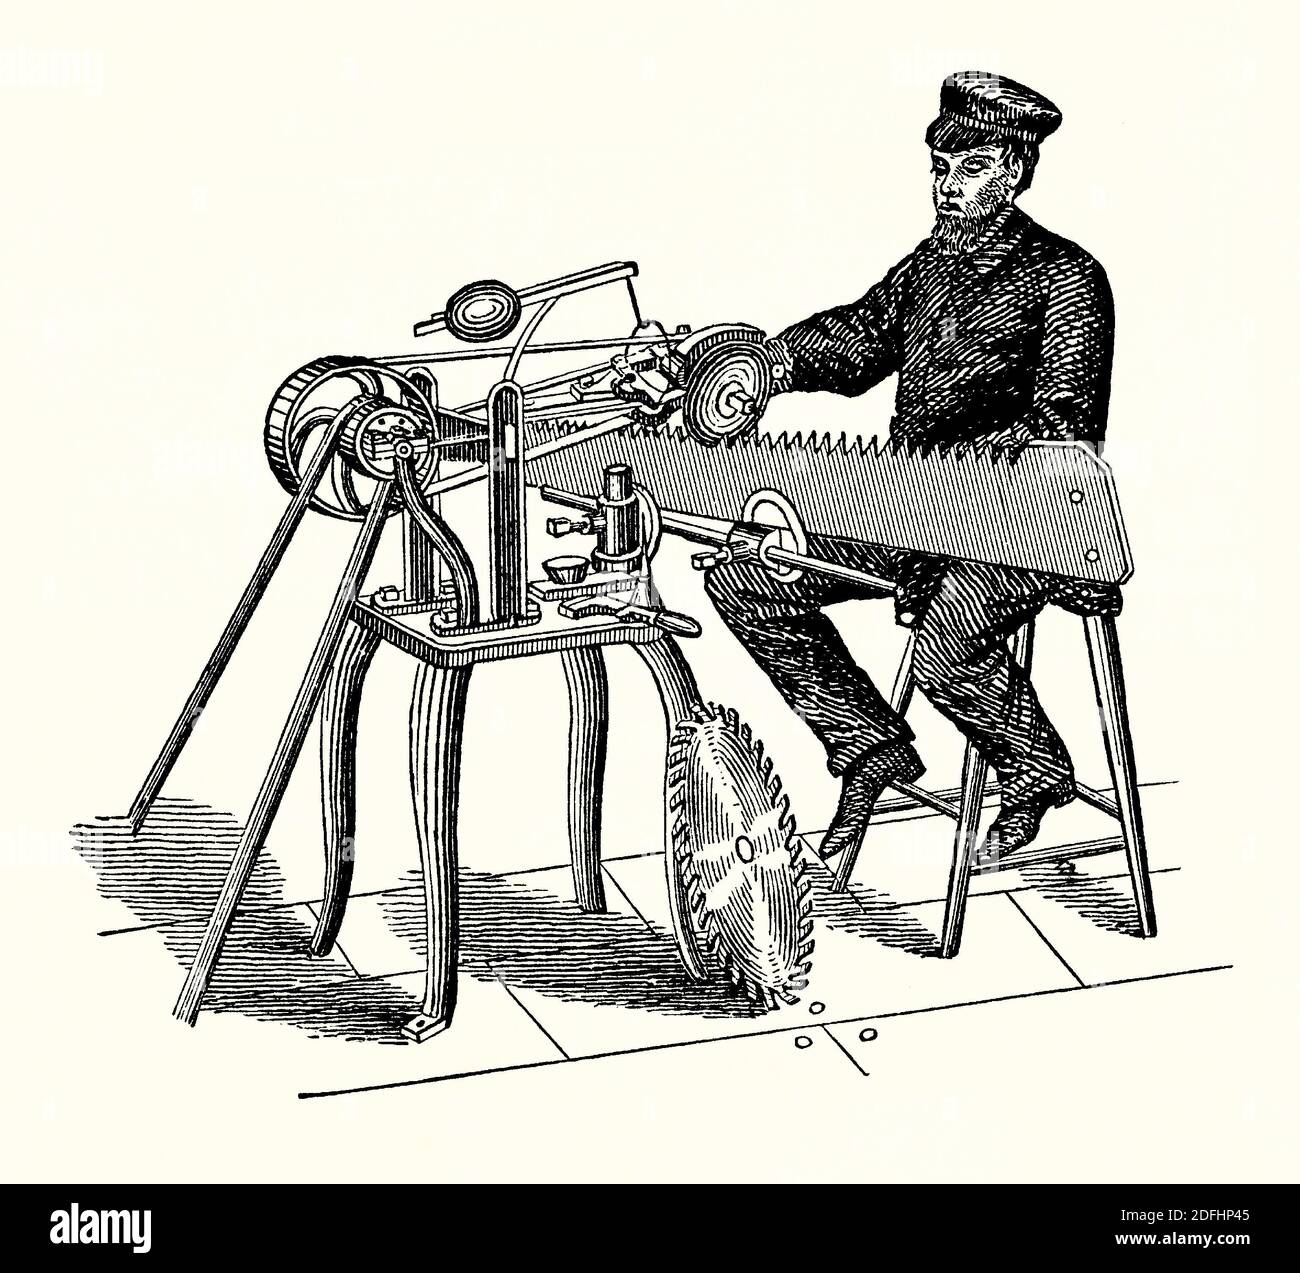 An old engraving of saw-filing machine. It is from a Victorian mechanical engineering book of the 1880s. This filing machine is belt driven. A rotating grinding wheel can be adjusted by the worker to meet the saw at the correct angle. A file is used to remove fine amounts of material from a tool to keep it sharp. A saw filer or saw doctor is a tradesperson who maintains and repairs saws. It requires a high degree of skill. Levelling, tensioning and benching are three of the techniques employed. Stock Photo